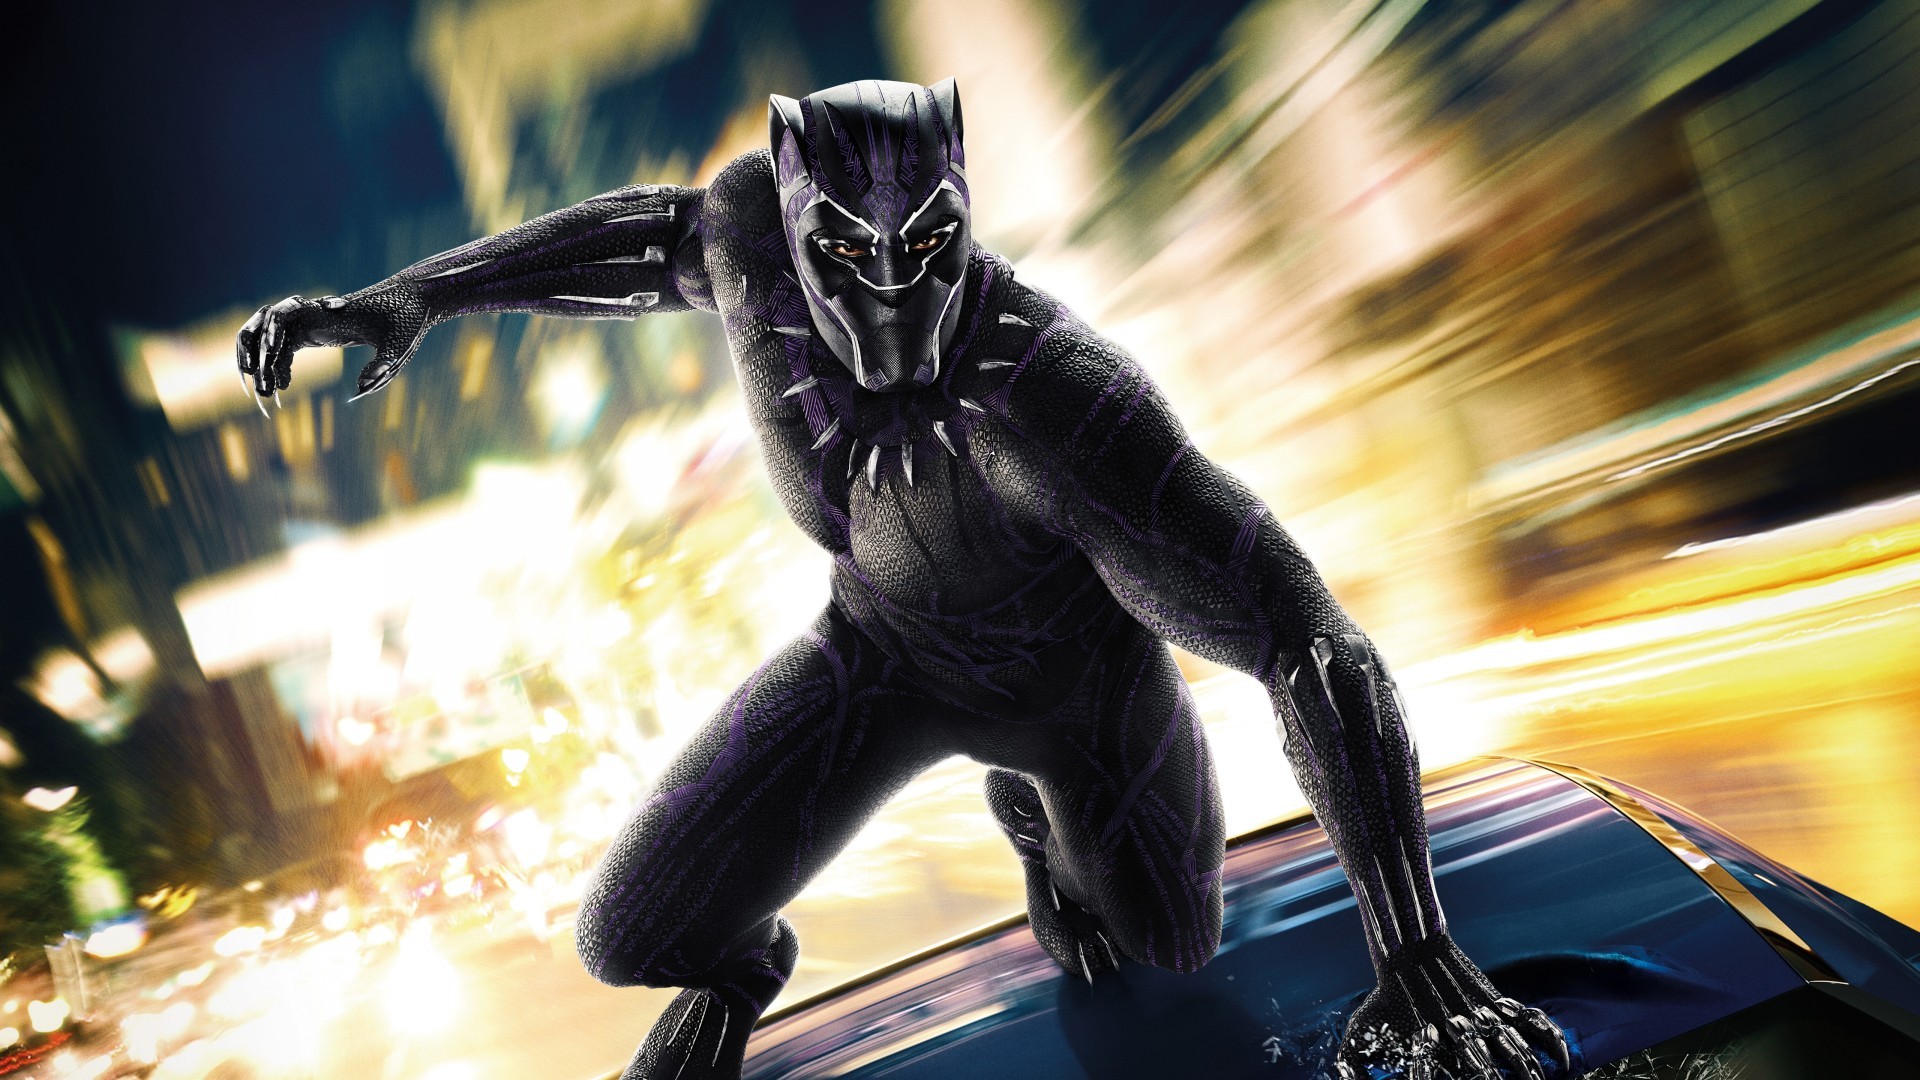 Black Panther Wallpaper HD with high-resolution 1920x1080 pixel. You can use this poster wallpaper for your Desktop Computers, Mac Screensavers, Windows Backgrounds, iPhone Wallpapers, Tablet or Android Lock screen and another Mobile device